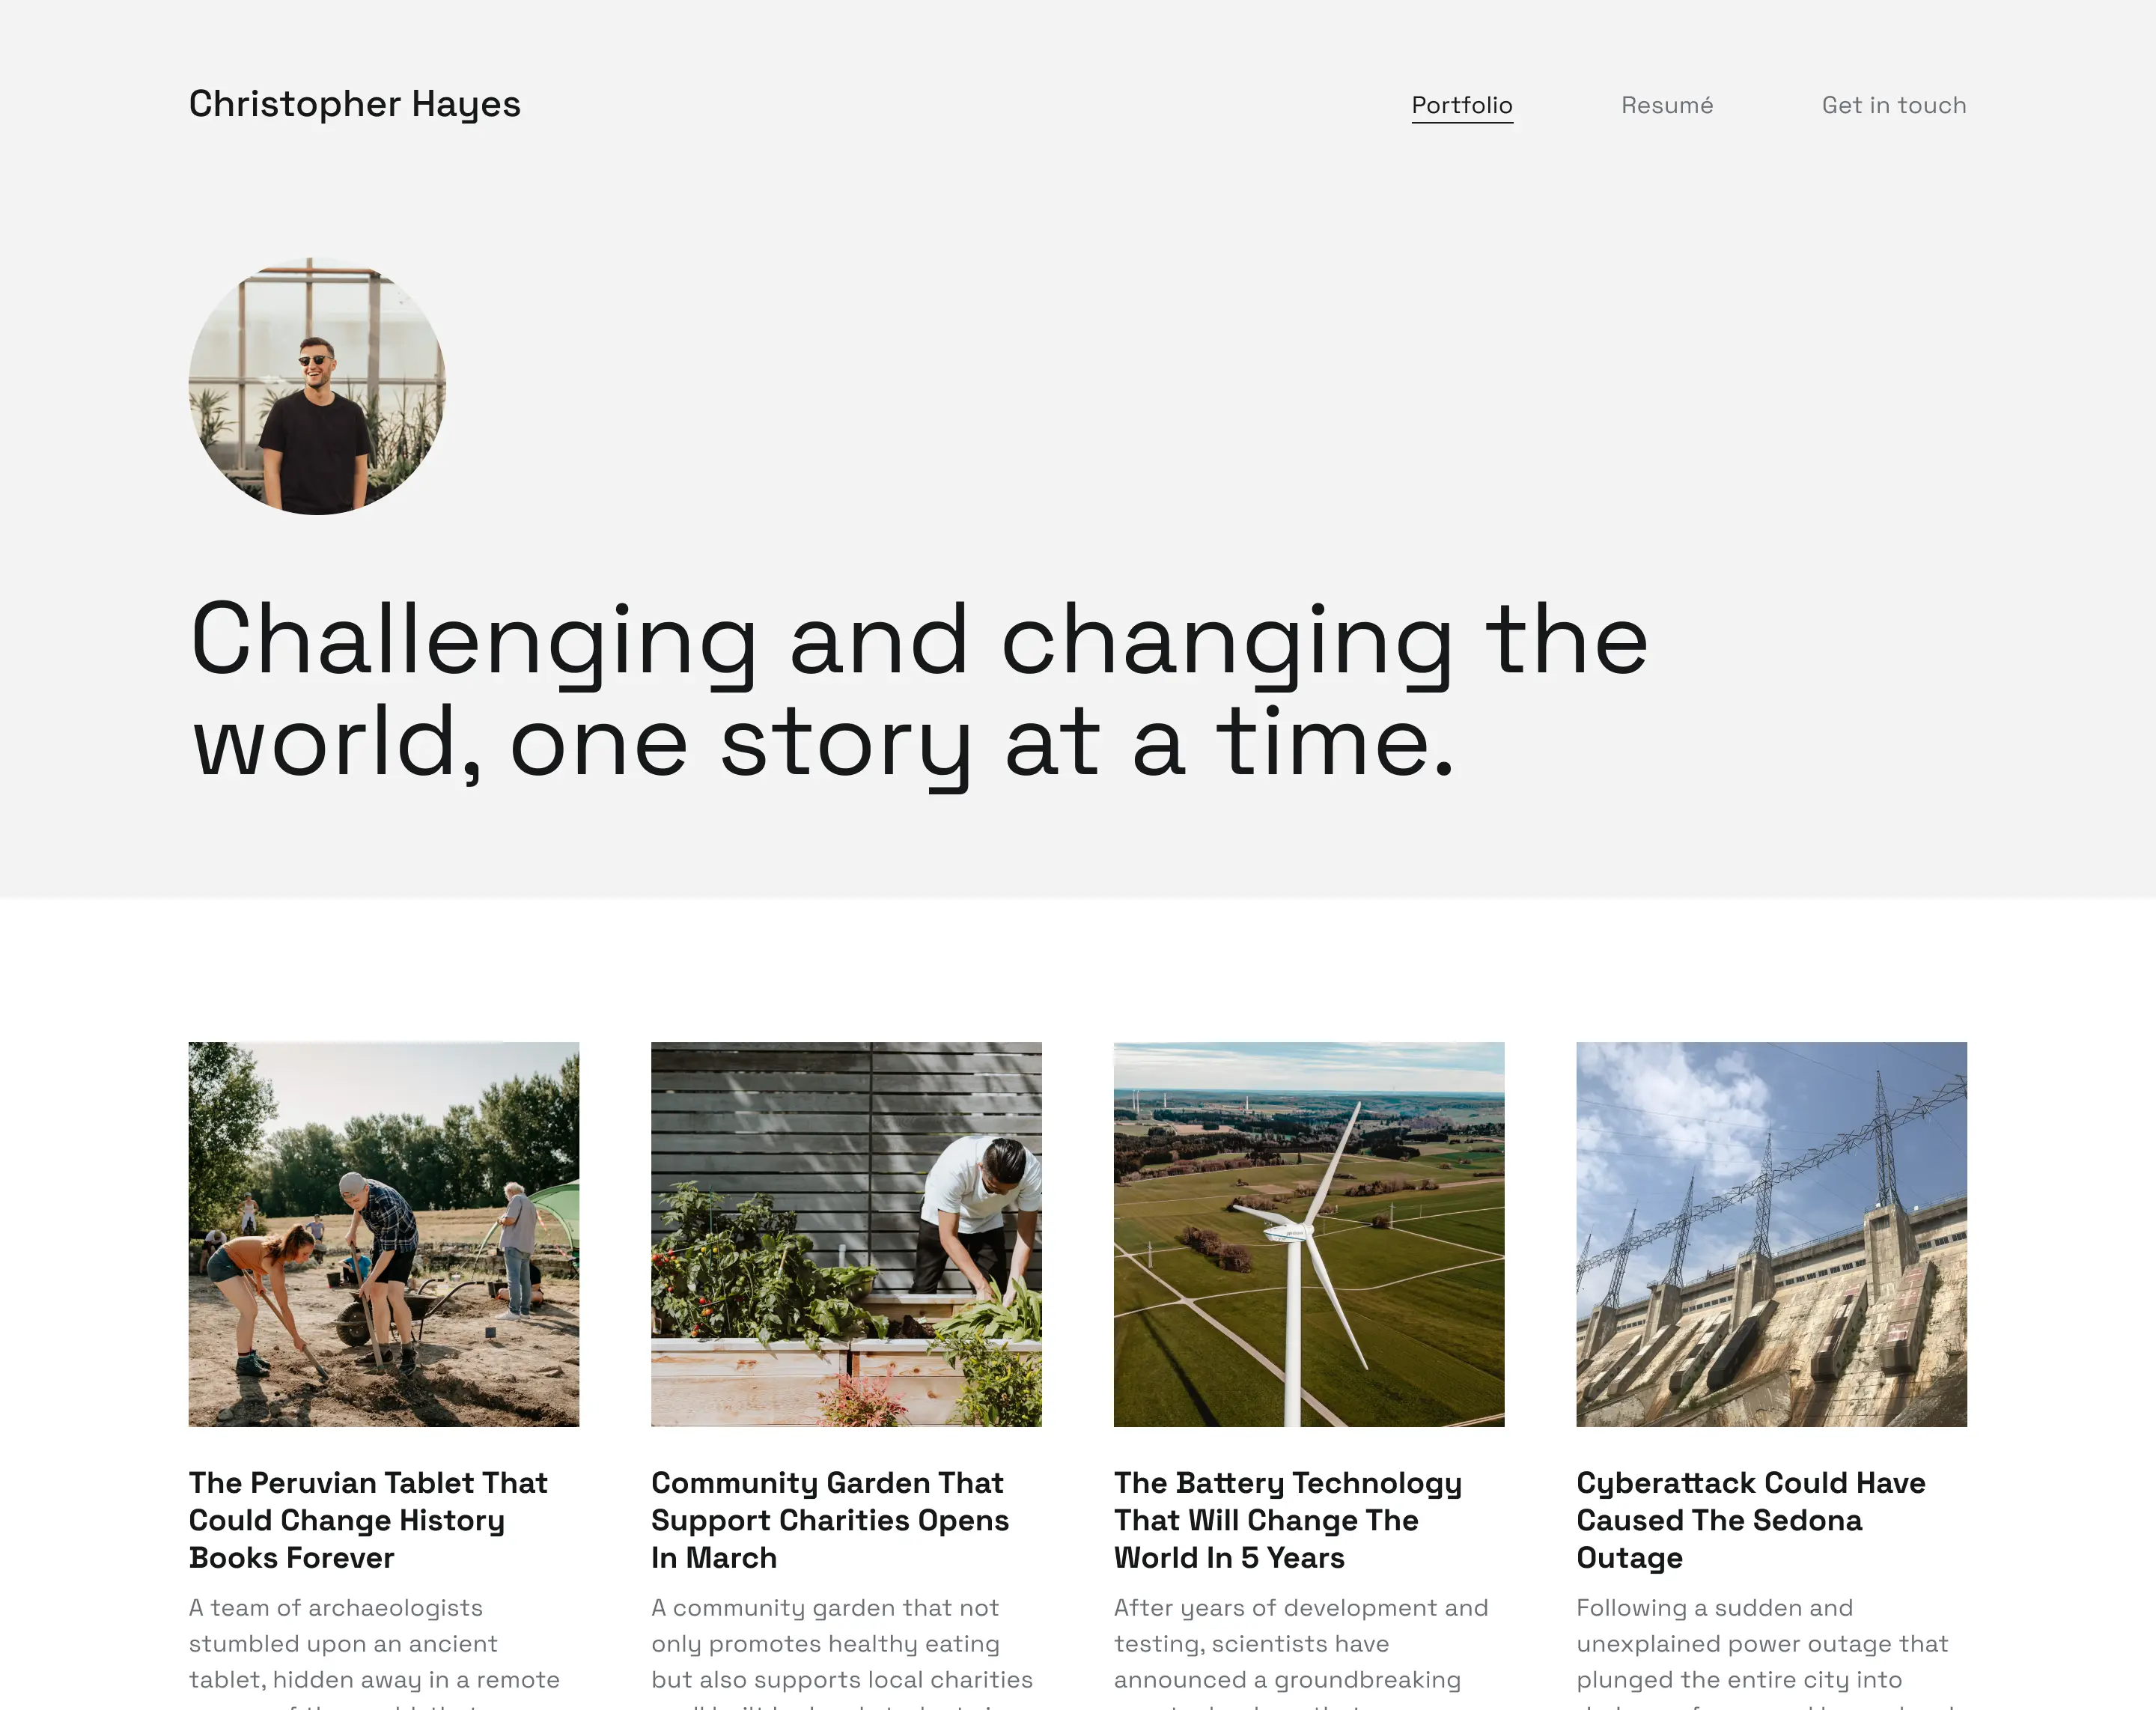 The portfolio of Christopher Hayes, journalist, made with Copyfolio.